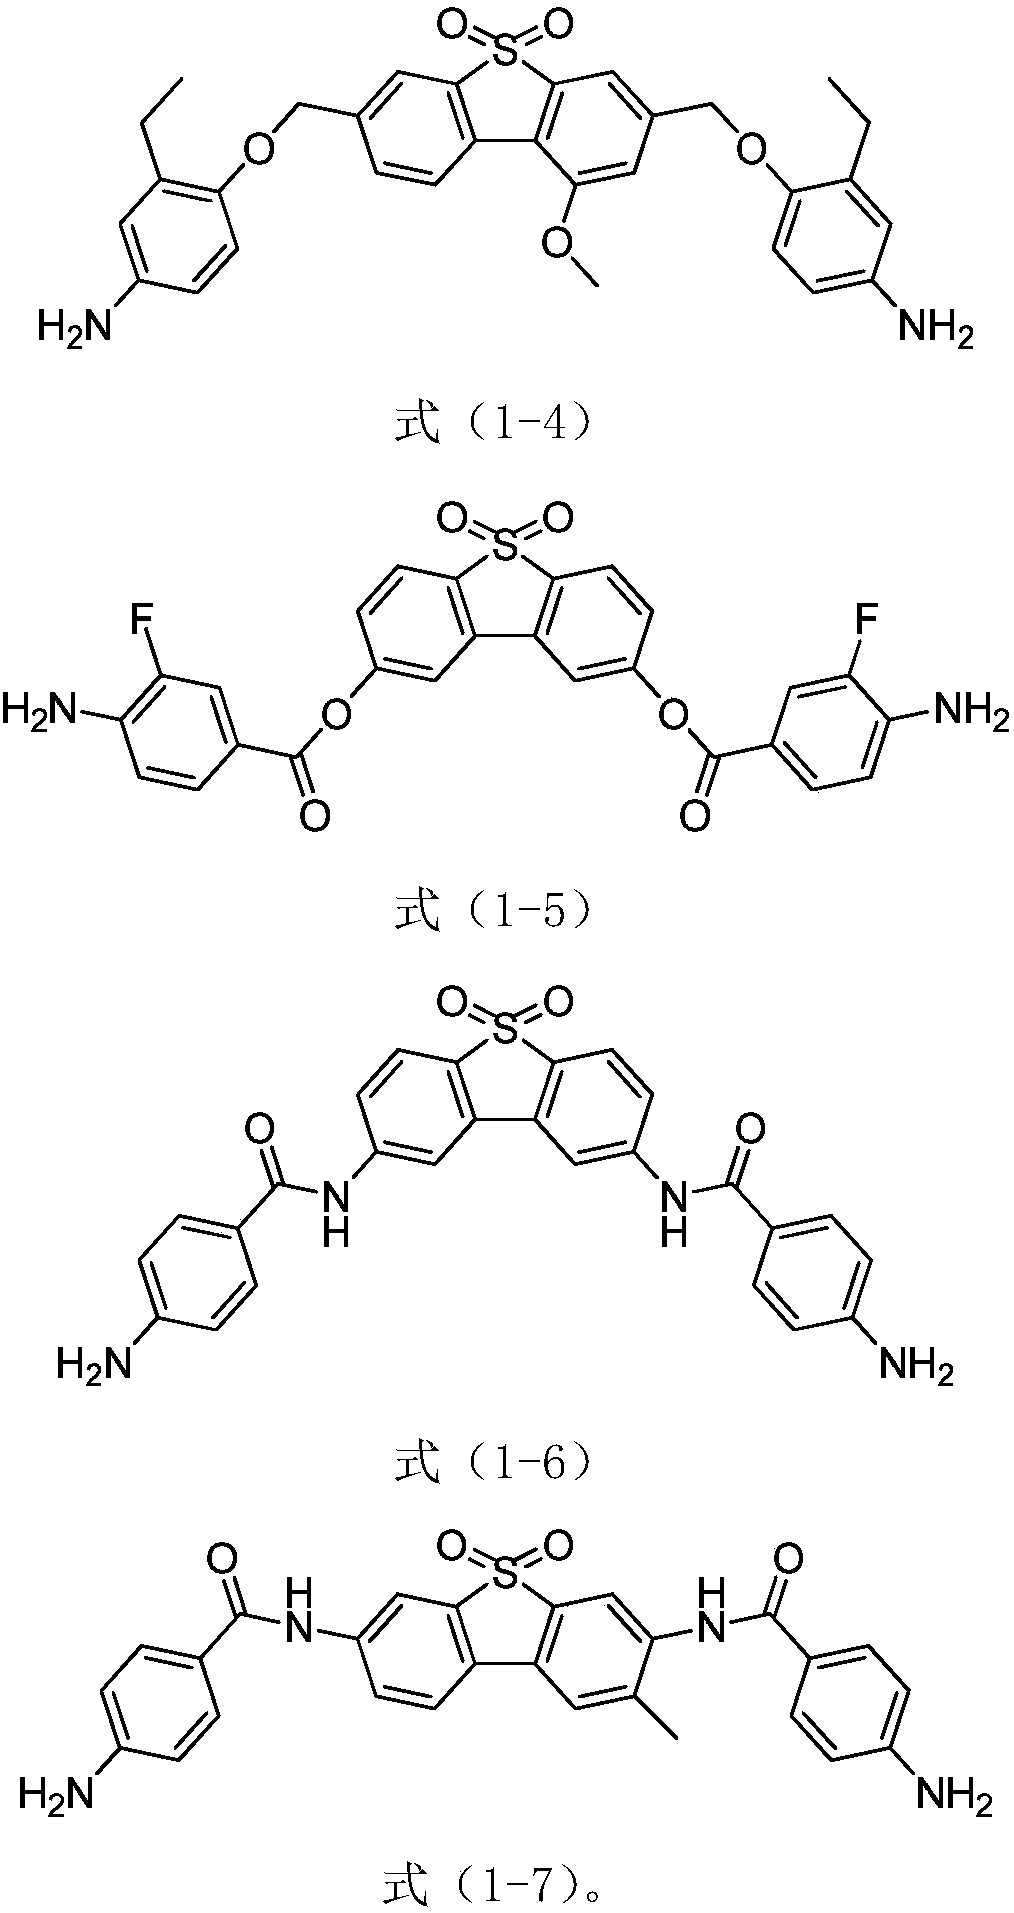 Diamine compound for preparing liquid crystal aligning agent and application of diamine compound